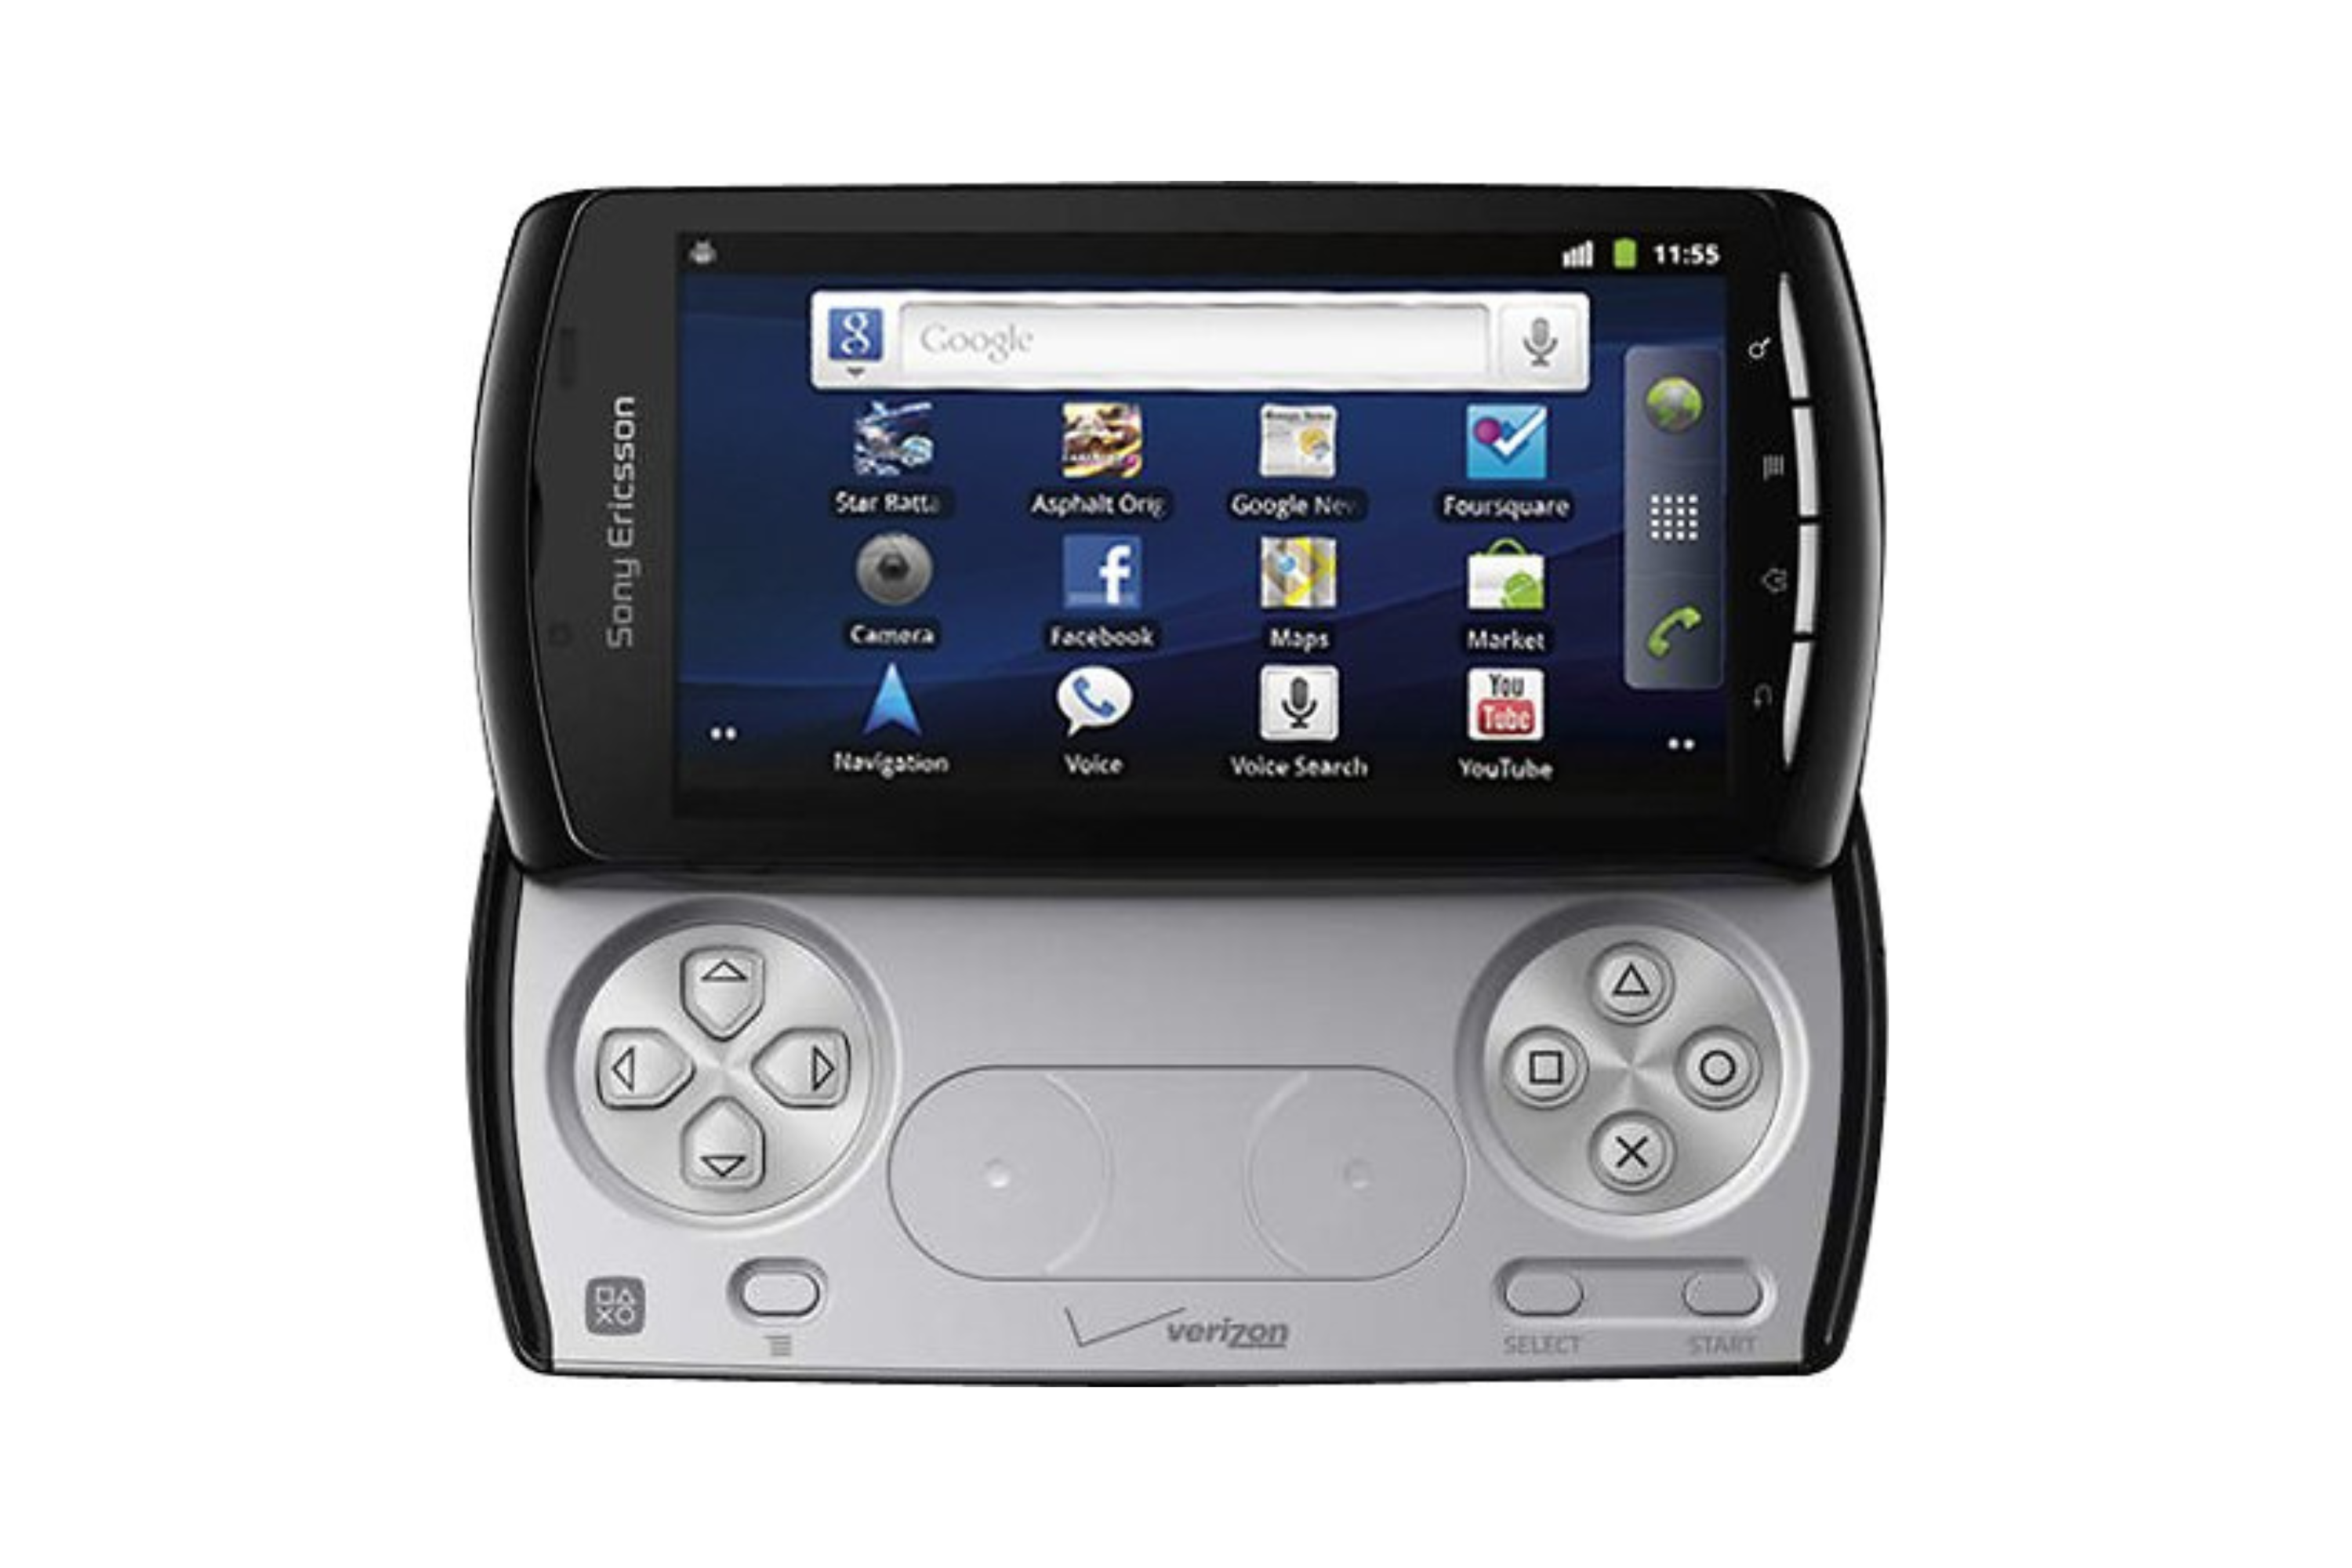 Sony Xperia Play slides up to an open position showing game controls